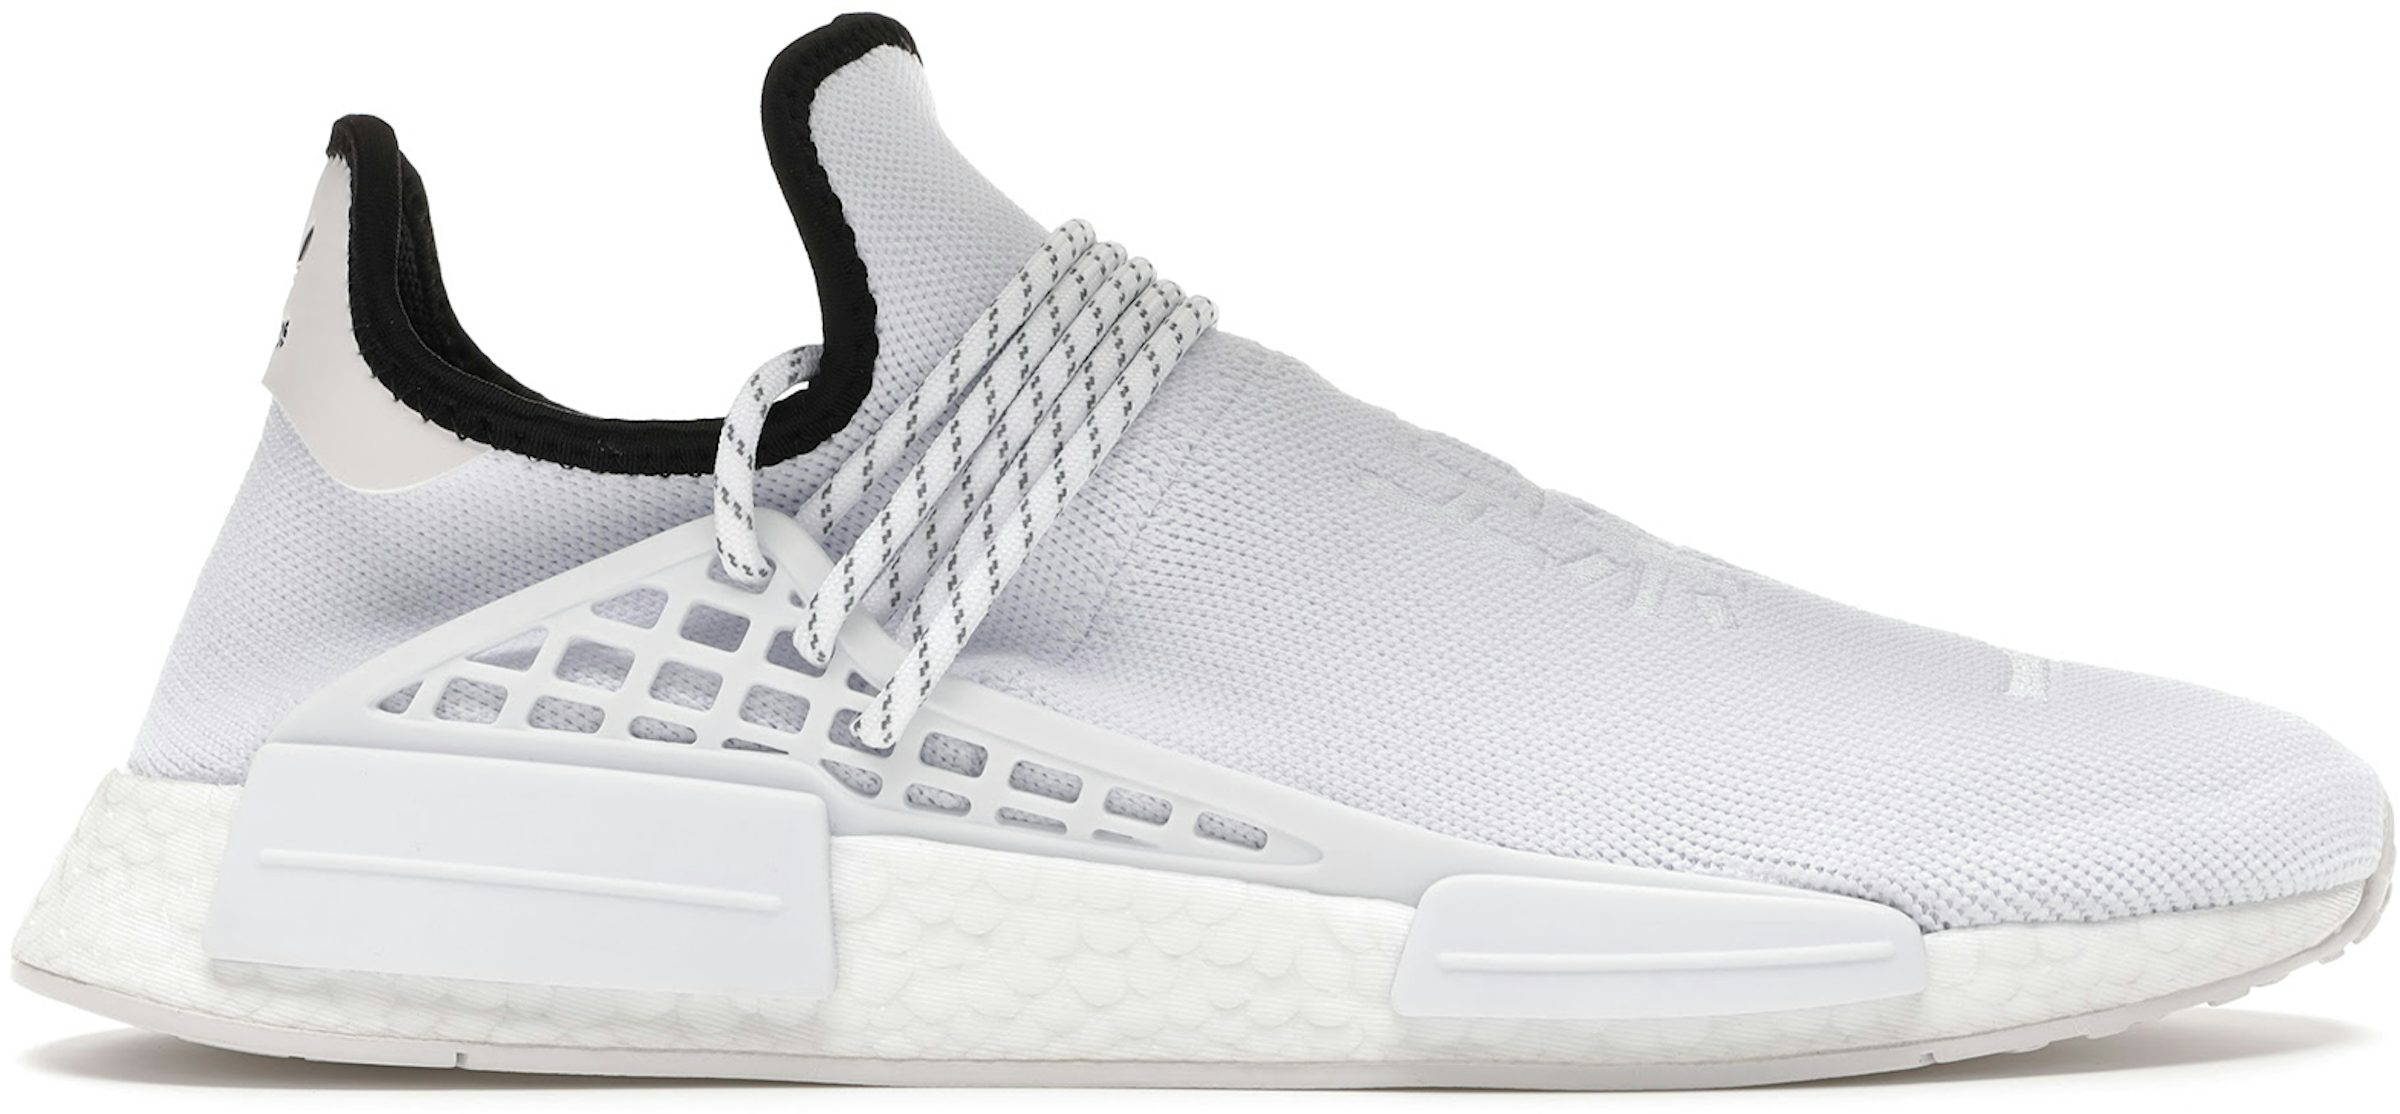 Best Authentic Adidas Nmd R1 Supreme X Louis Vuitton X for sale in Miami,  Florida for 2023